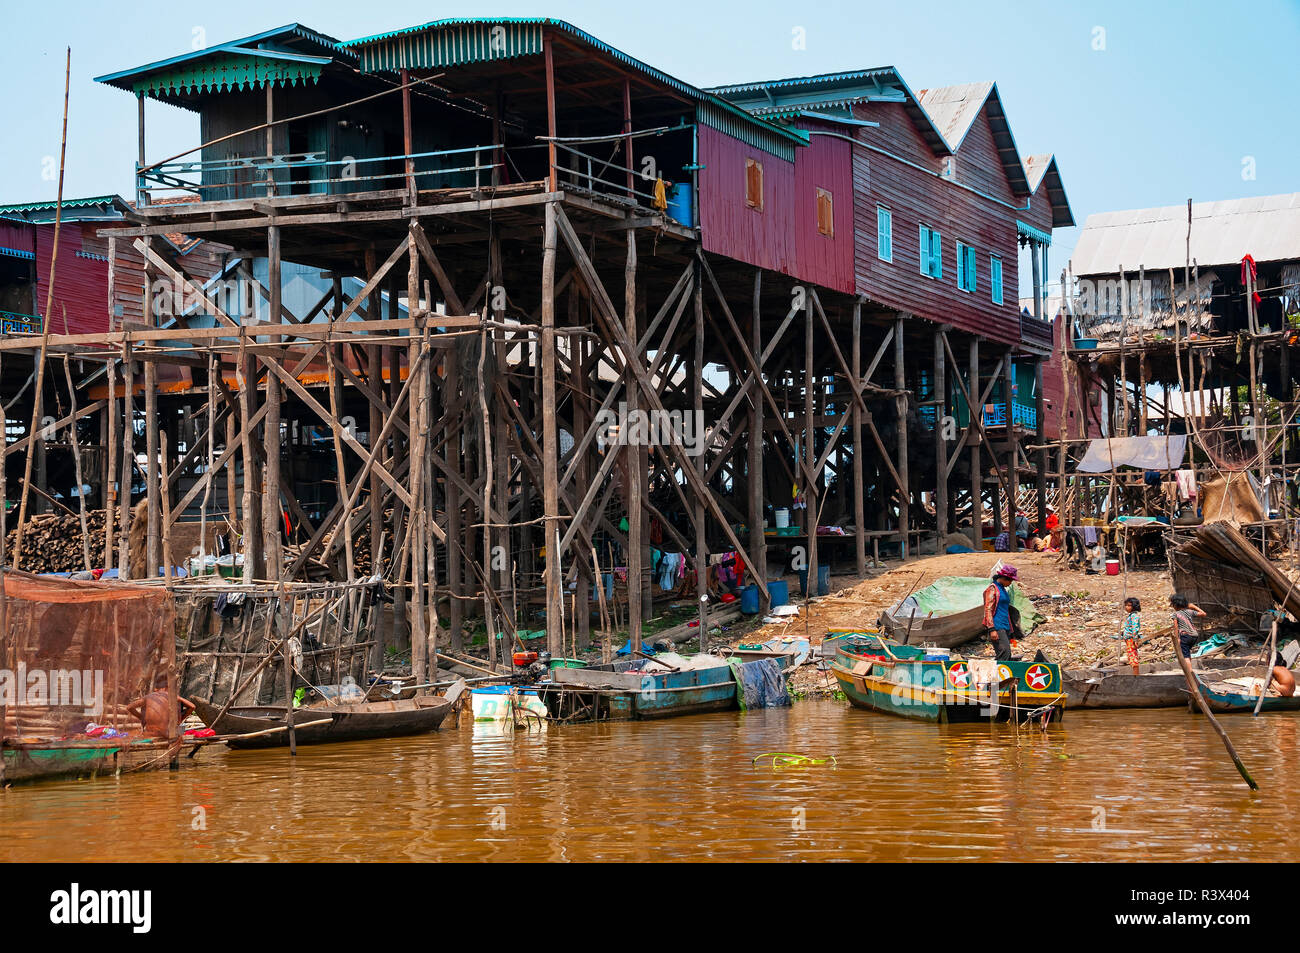 Stilt or stilted fishing village houses, in the dry season, situated on the banks of an estuary connecting it to Tonle Sap Lake,Cambodia Stock Photo